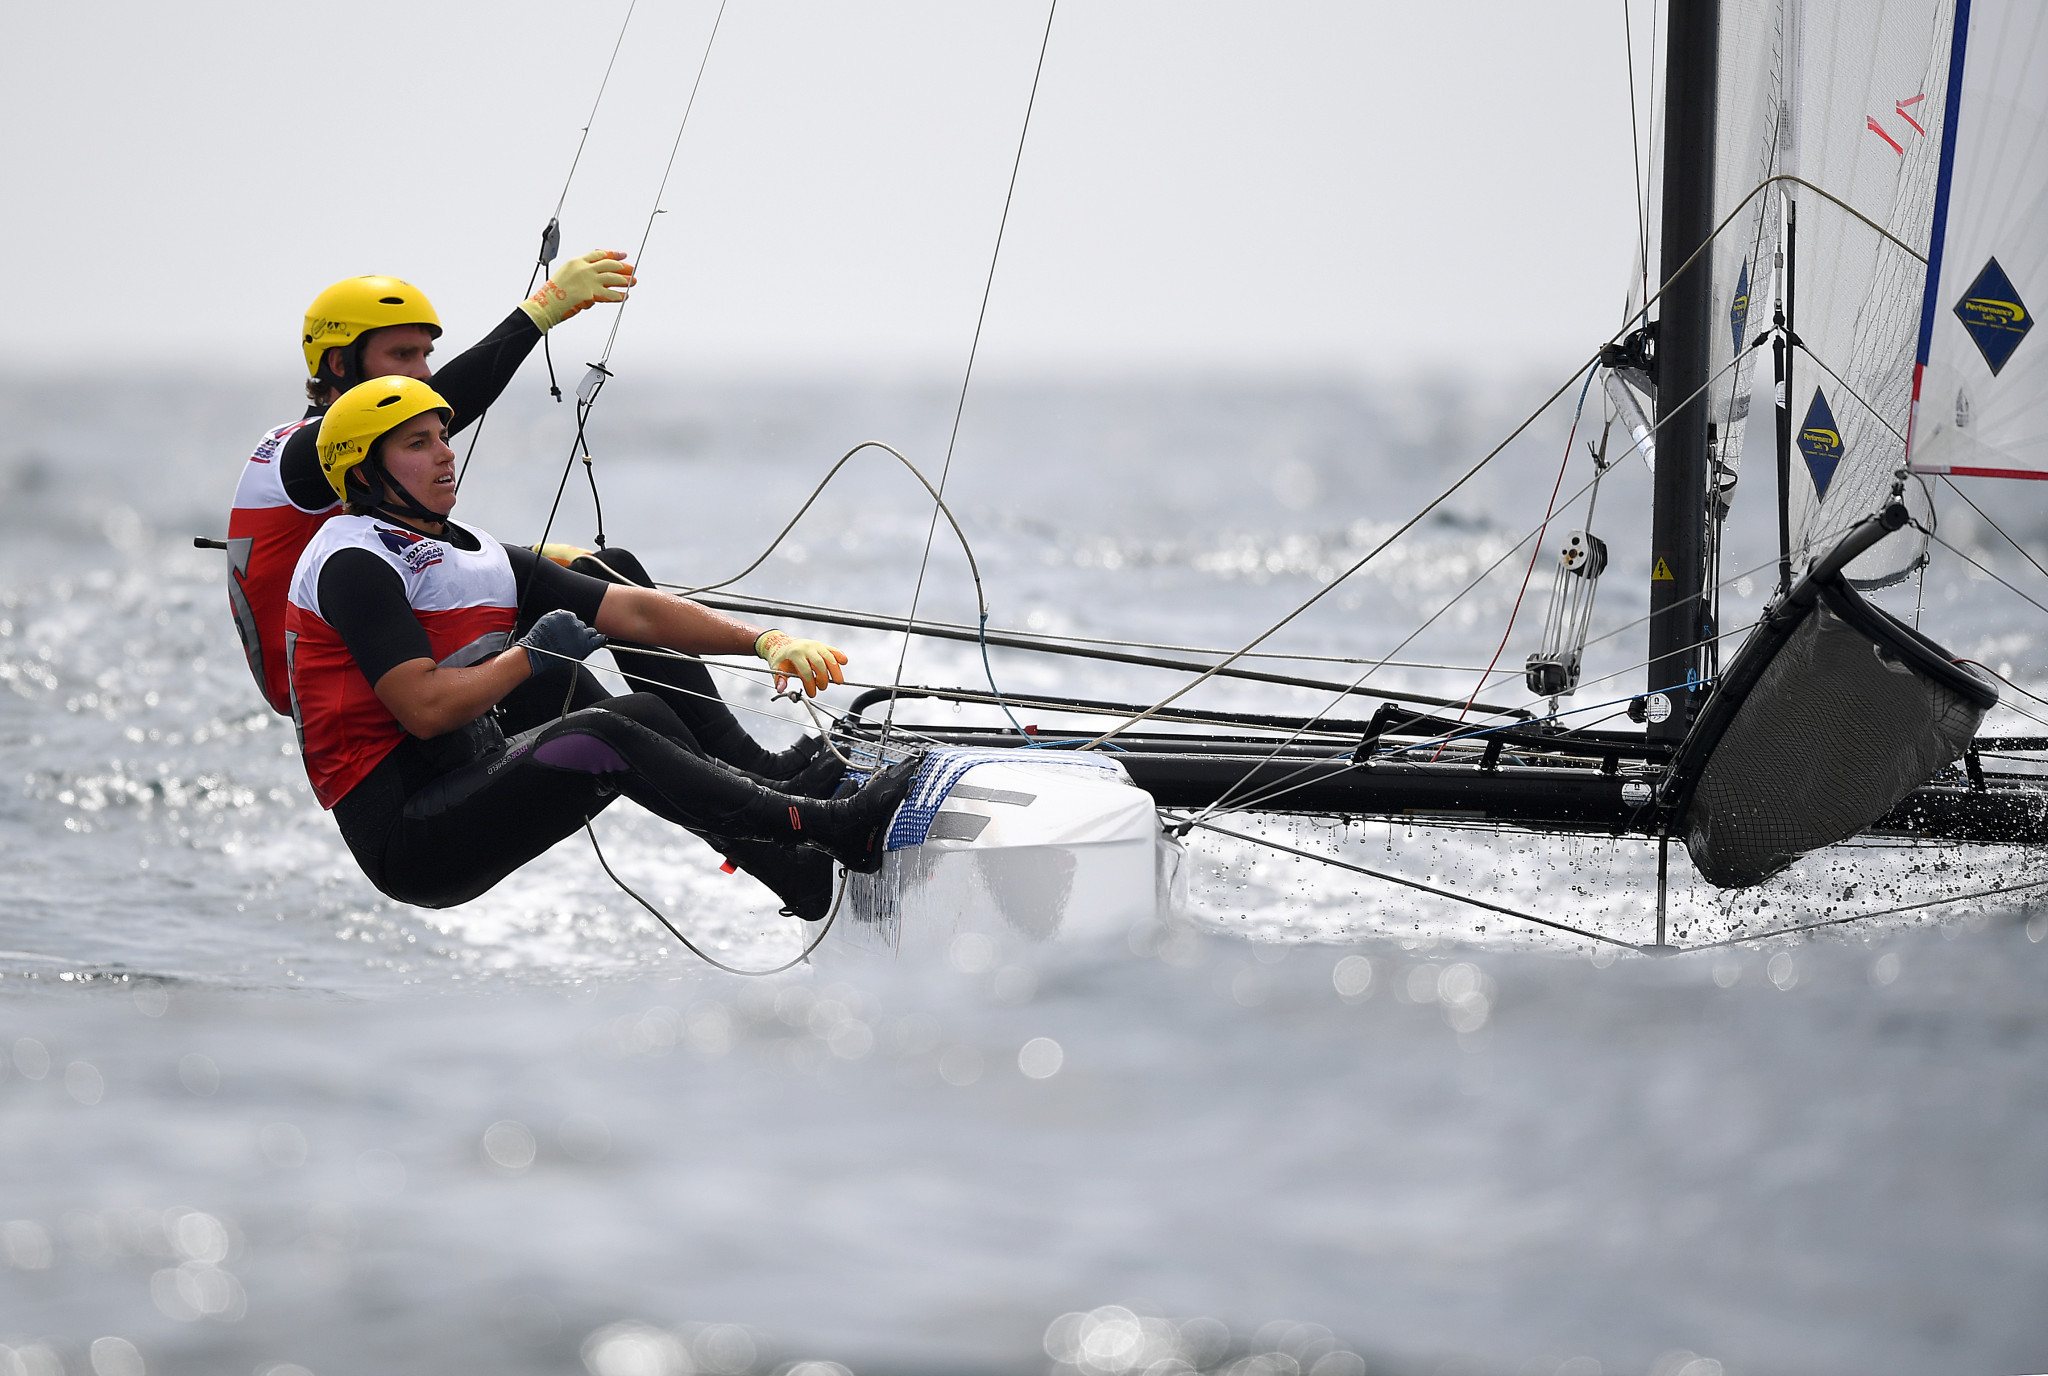 Vittorio Bissaro and Maelle Frascari move top of Nacra 17 standings at World Championships